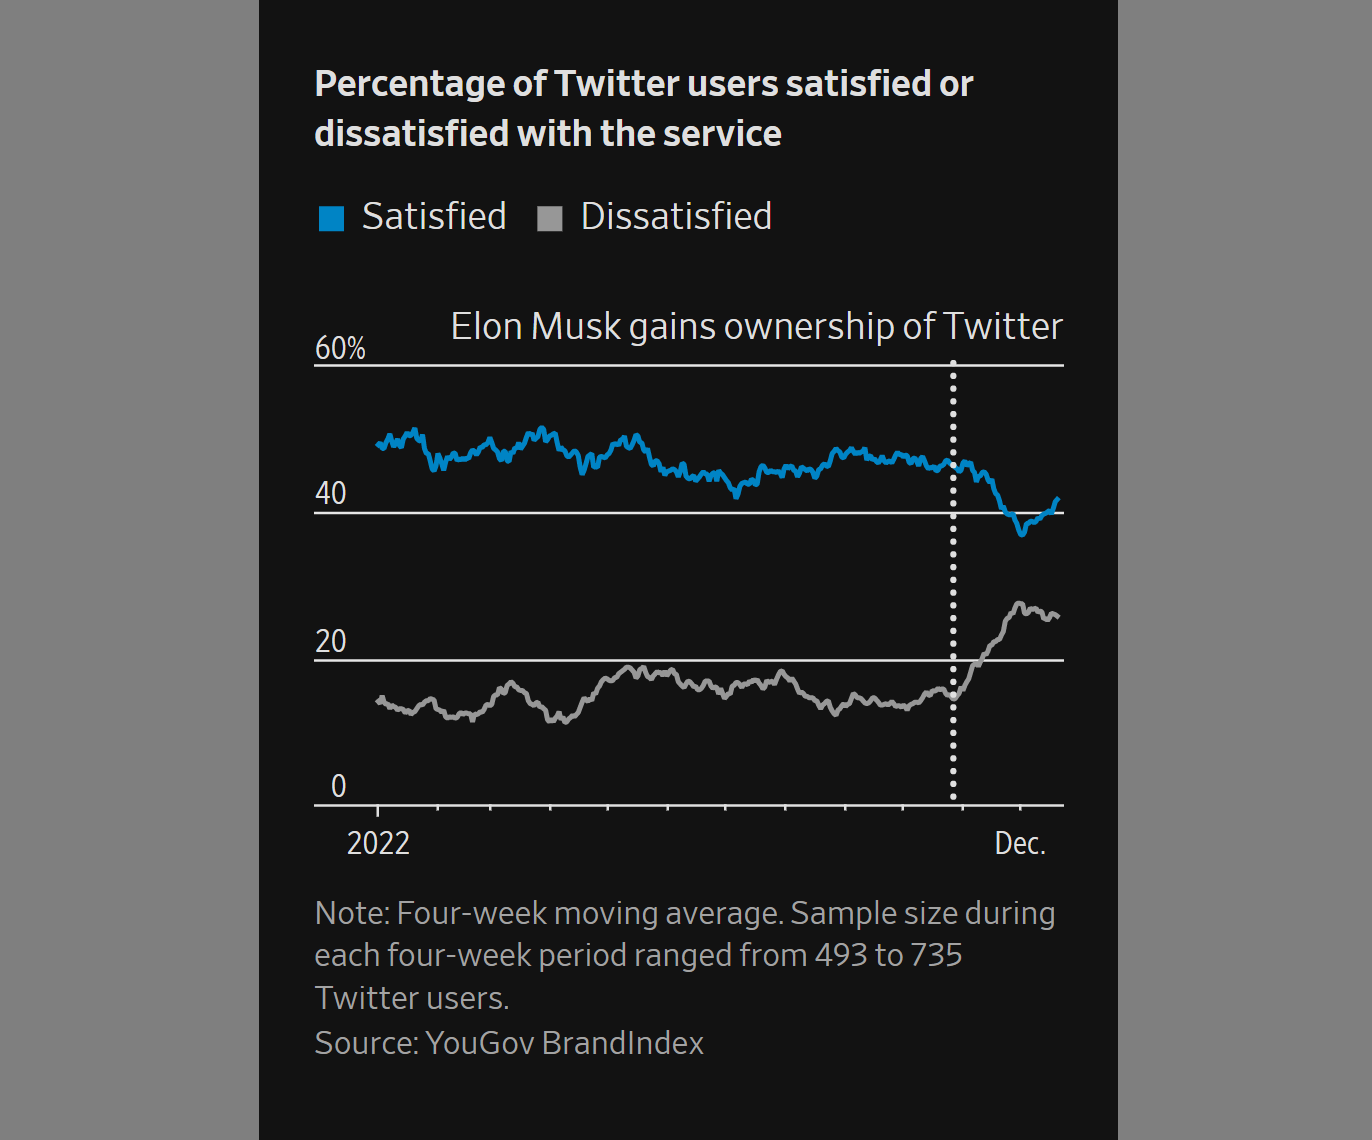 Nom : percentage-of-twitter-users-satisfied-or-dissatisfied-with-the-service.png
Affichages : 2855
Taille : 97,7 Ko